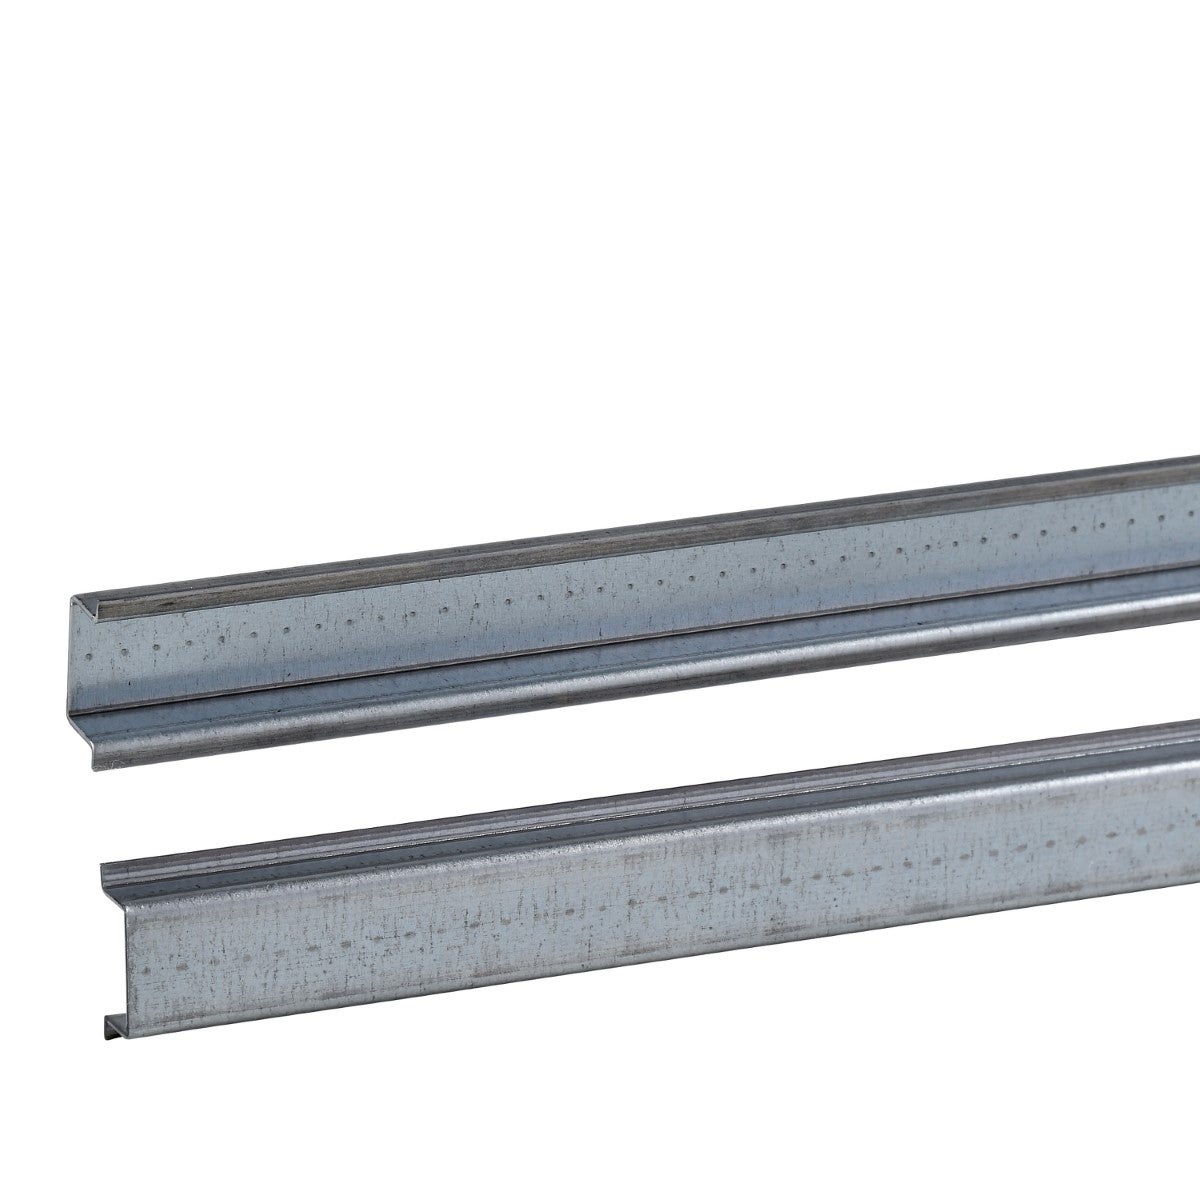 One symmetric mounting rail perforated 35x7.2 mm L2000 mm type B, Order by Multiples of 10 units